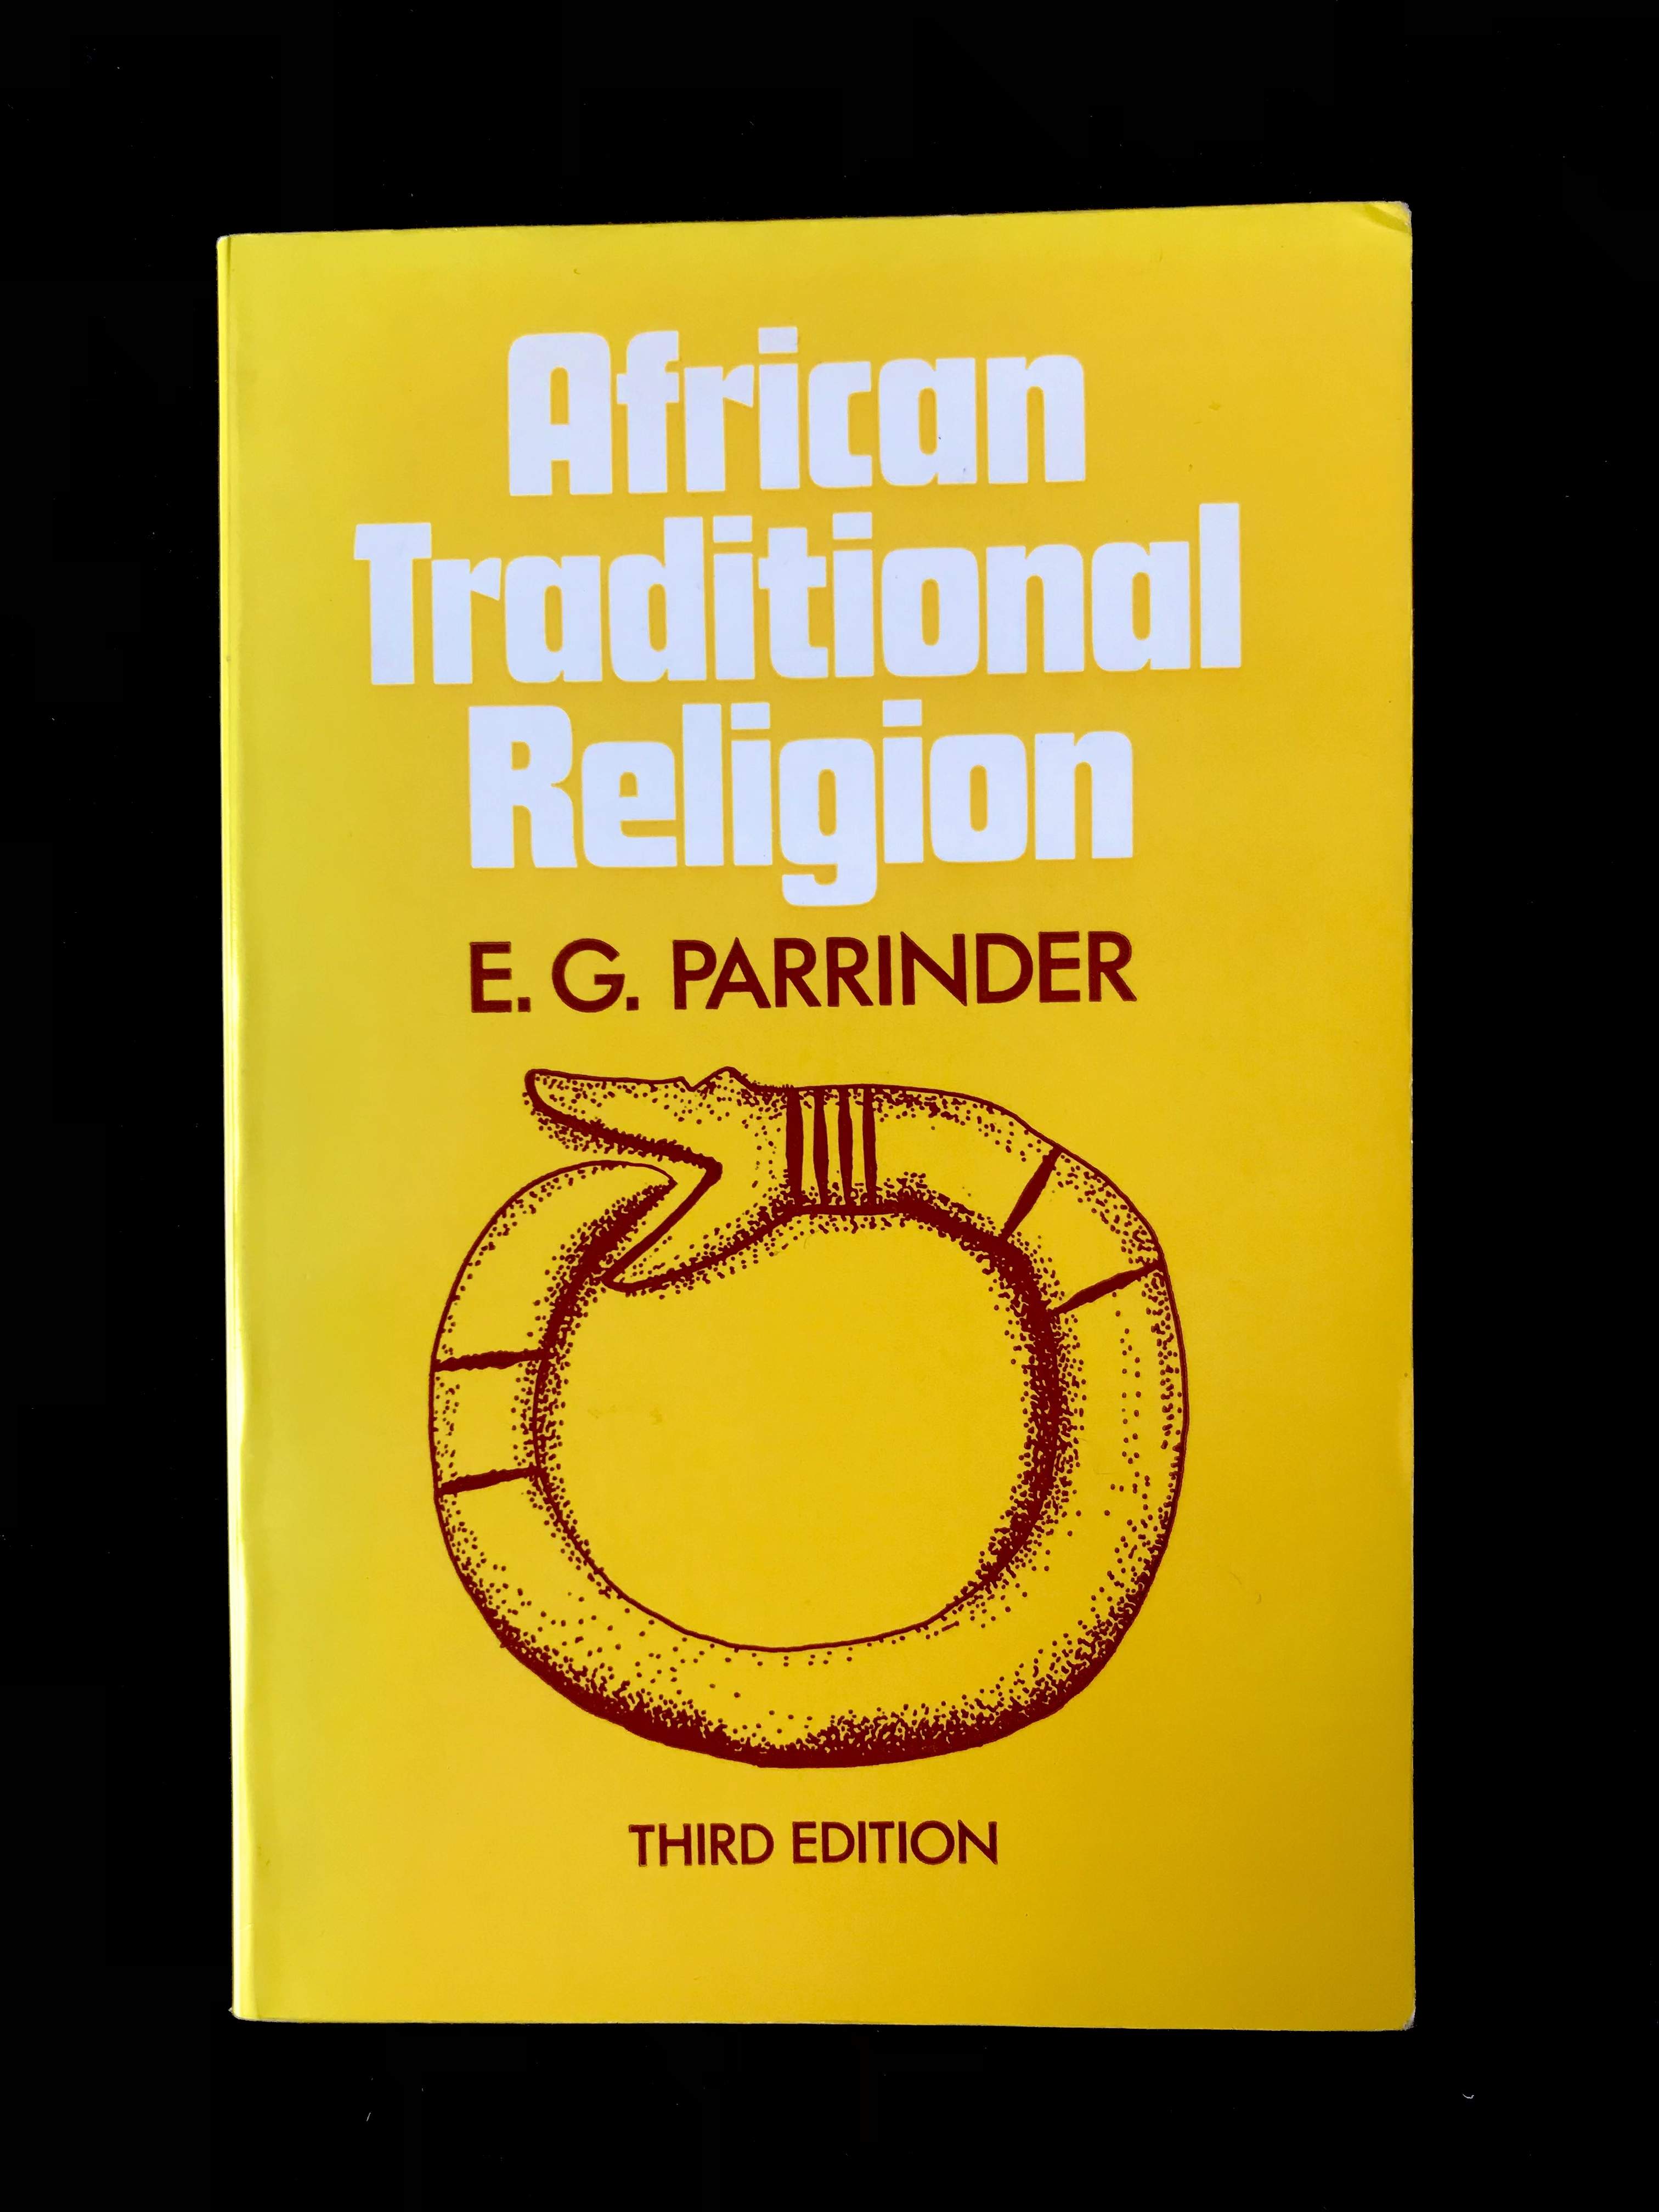 African Traditional Religion by E. G. Parrinder